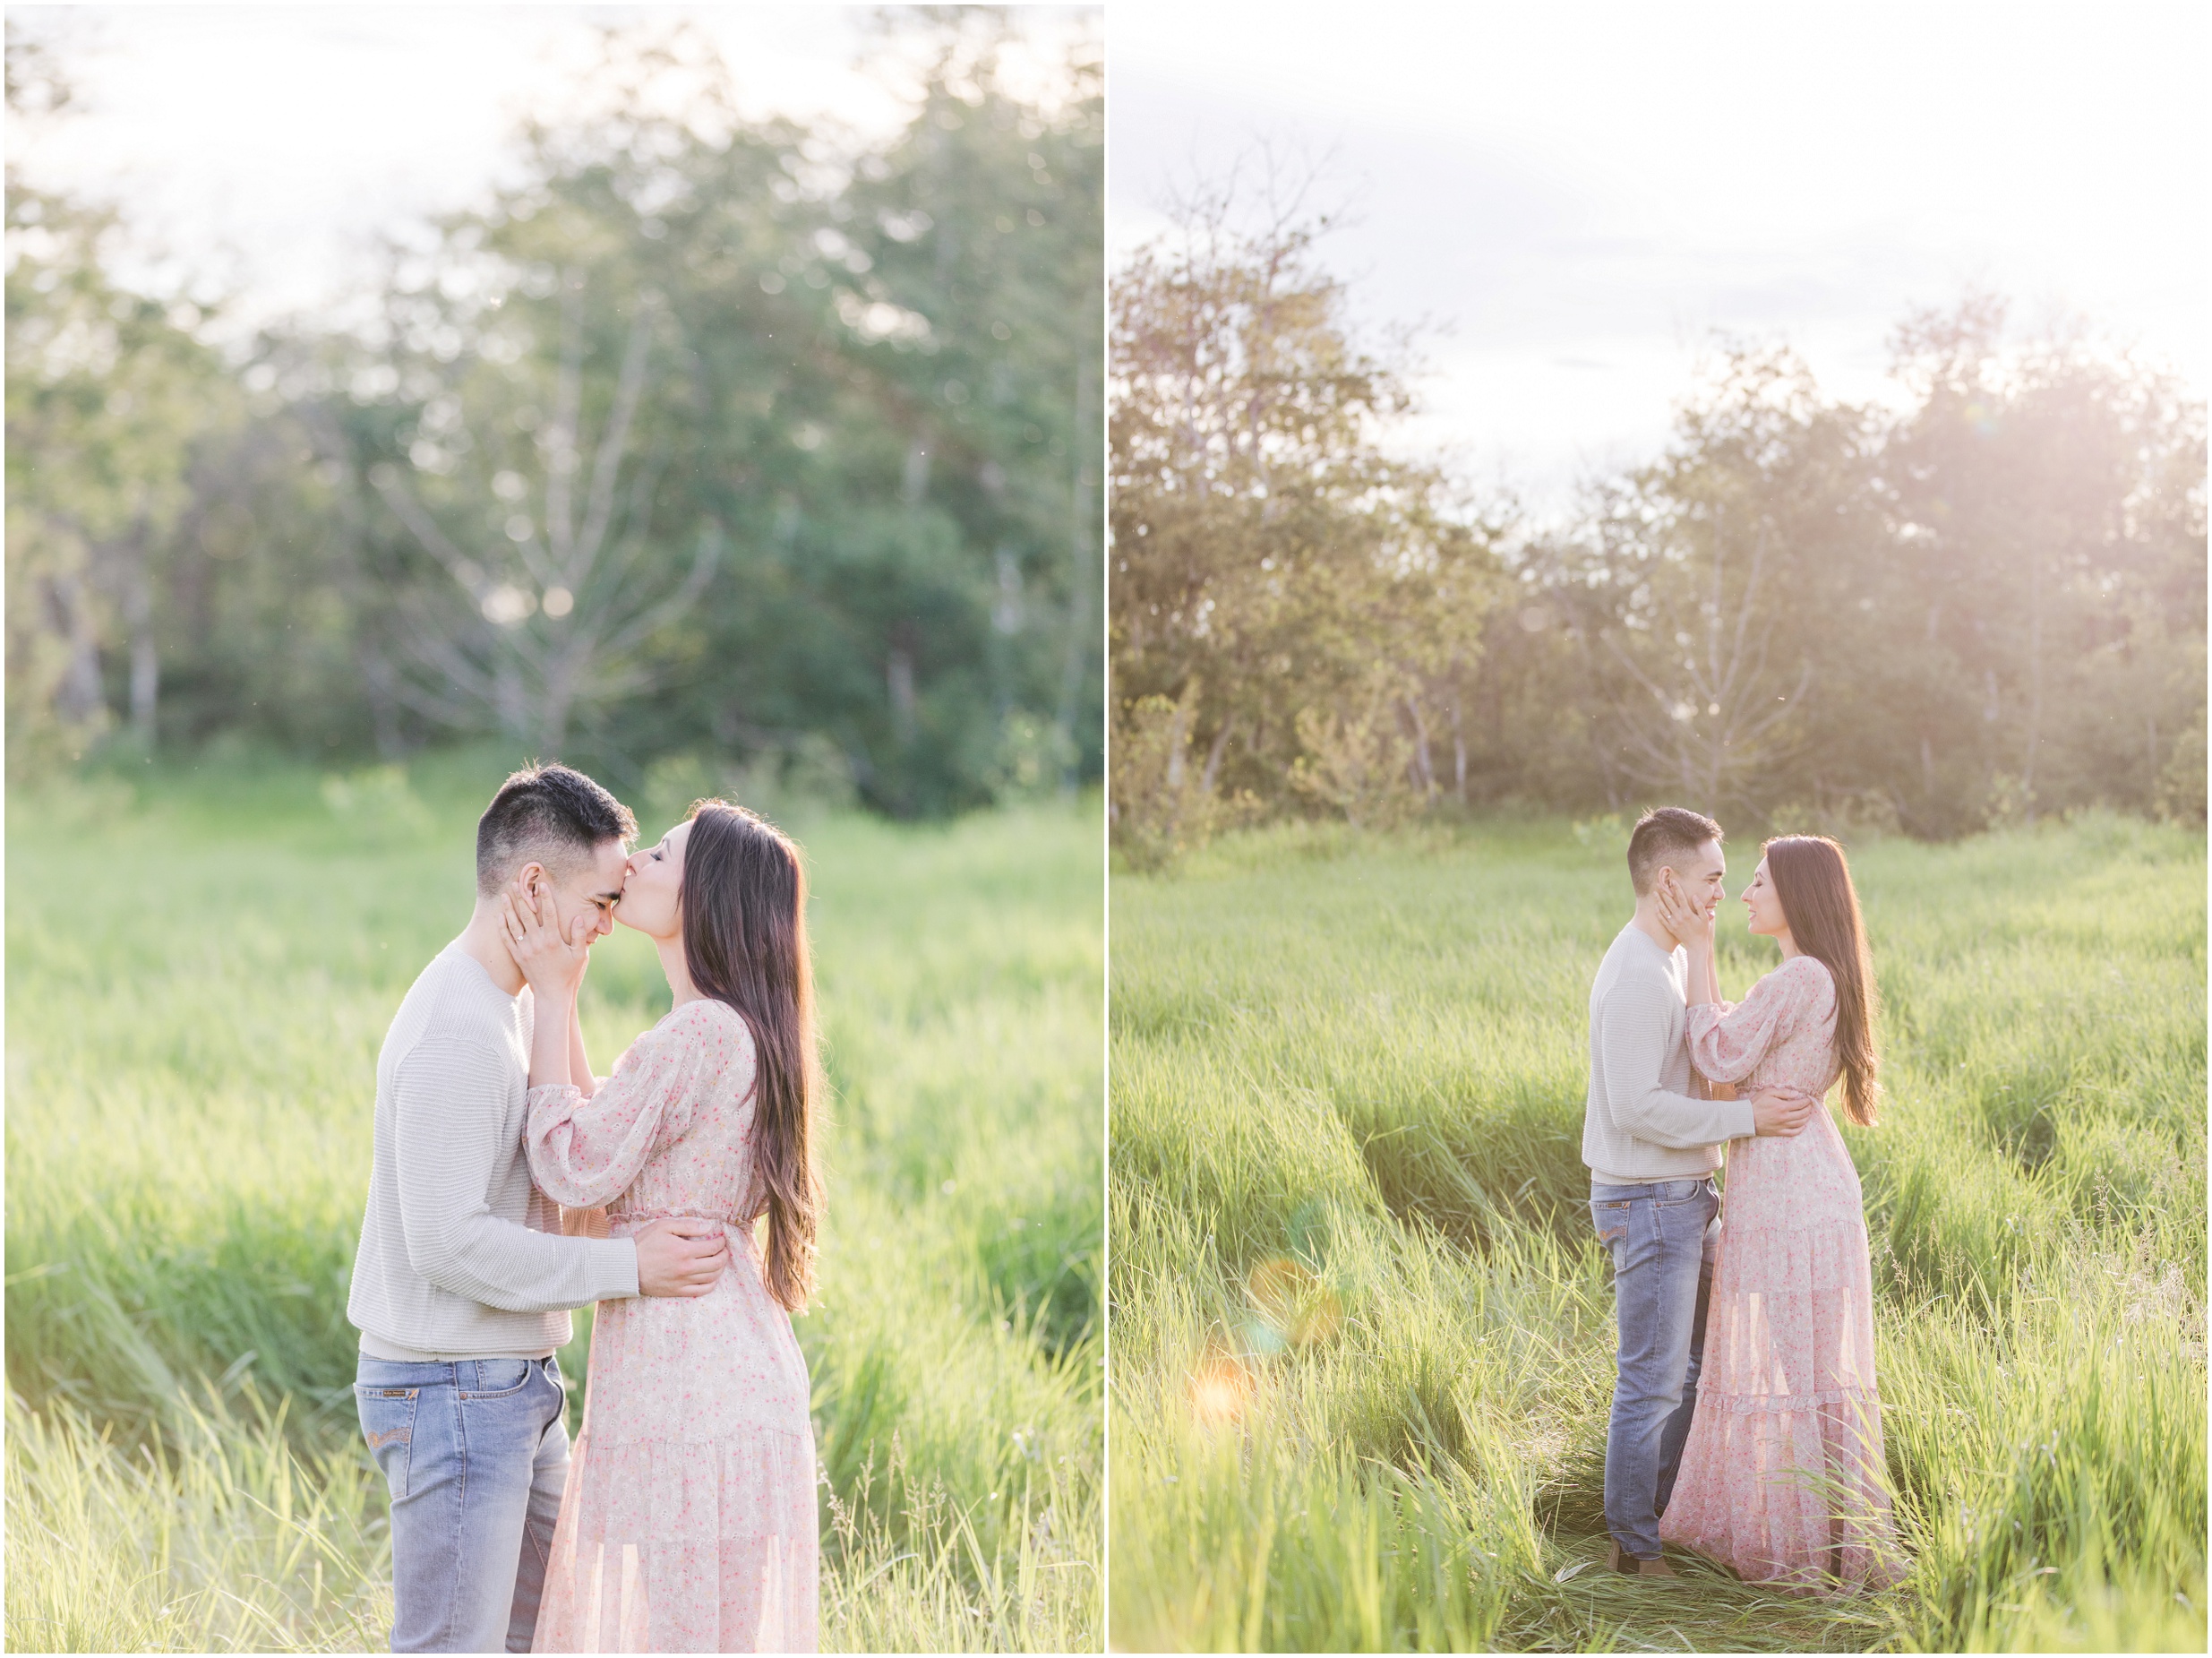 engagment photos, edmonton engagement photographer, nc photography, edmonton wedding photographer, outdoor engagement photos, field engagement photos, what to wear for engagement photos